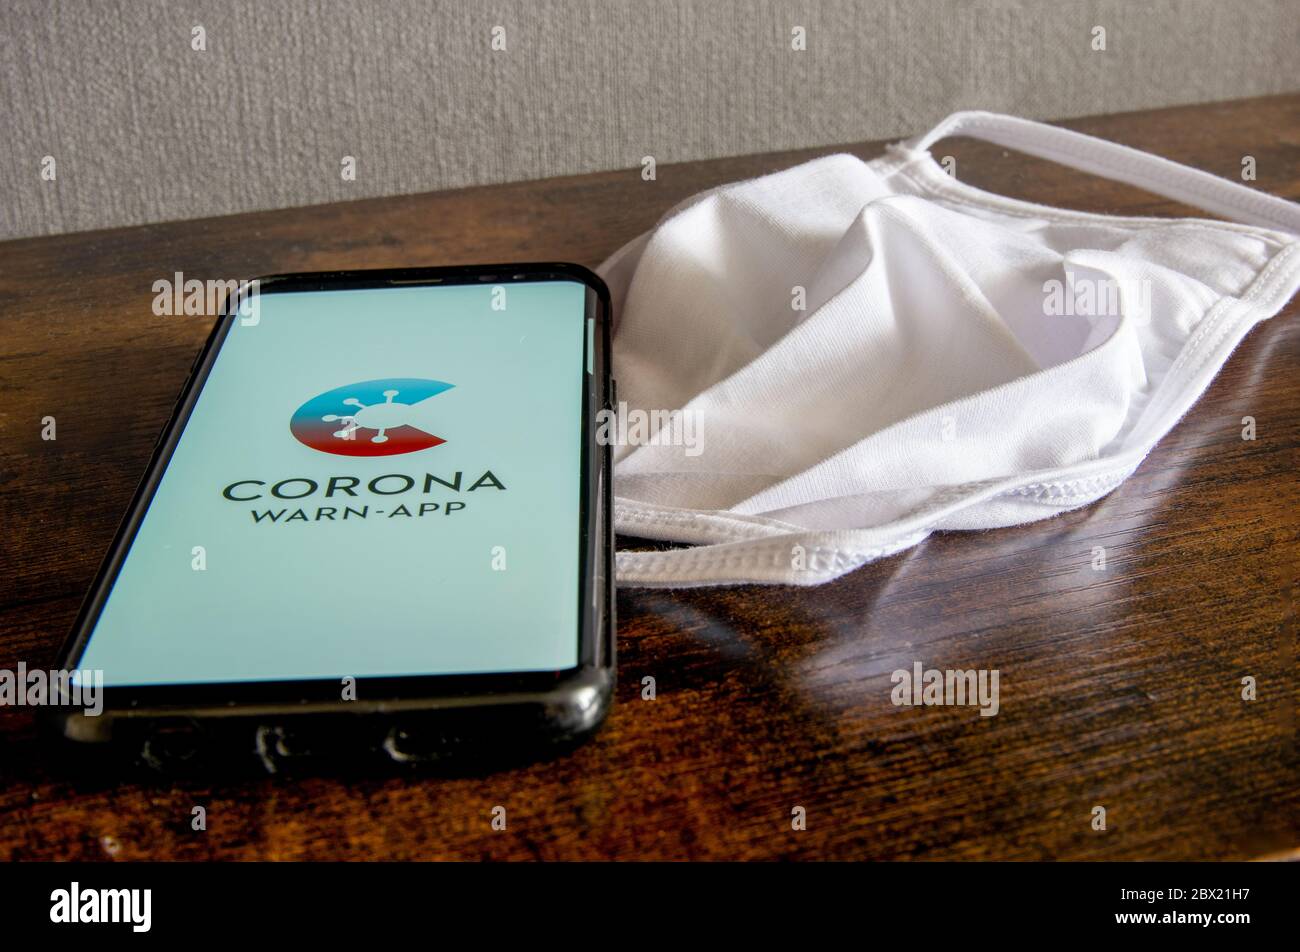 Zittau, Saxony / Germany - June 4th 2020: German Corona Virus Warn App for COVID-19 tracing with white face mask on wooden surface. The new normal, it Stock Photo